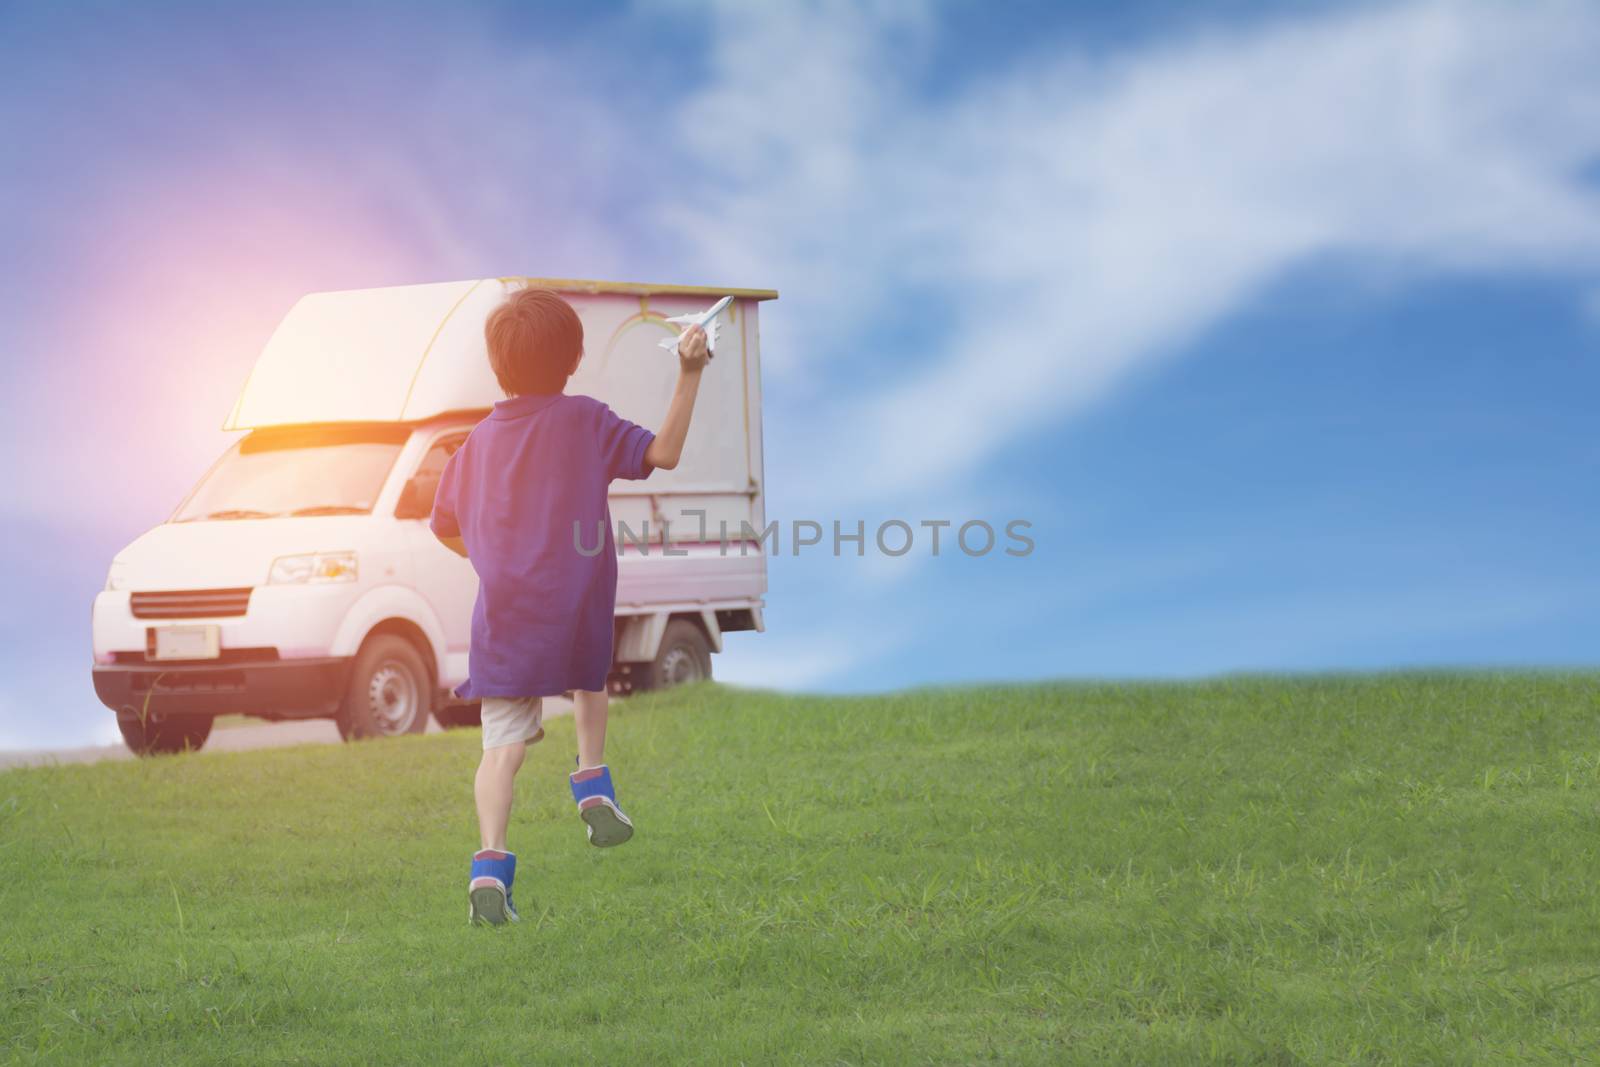 Kid playing with toy airplane and car. Kids playing with toy air by kirisa99